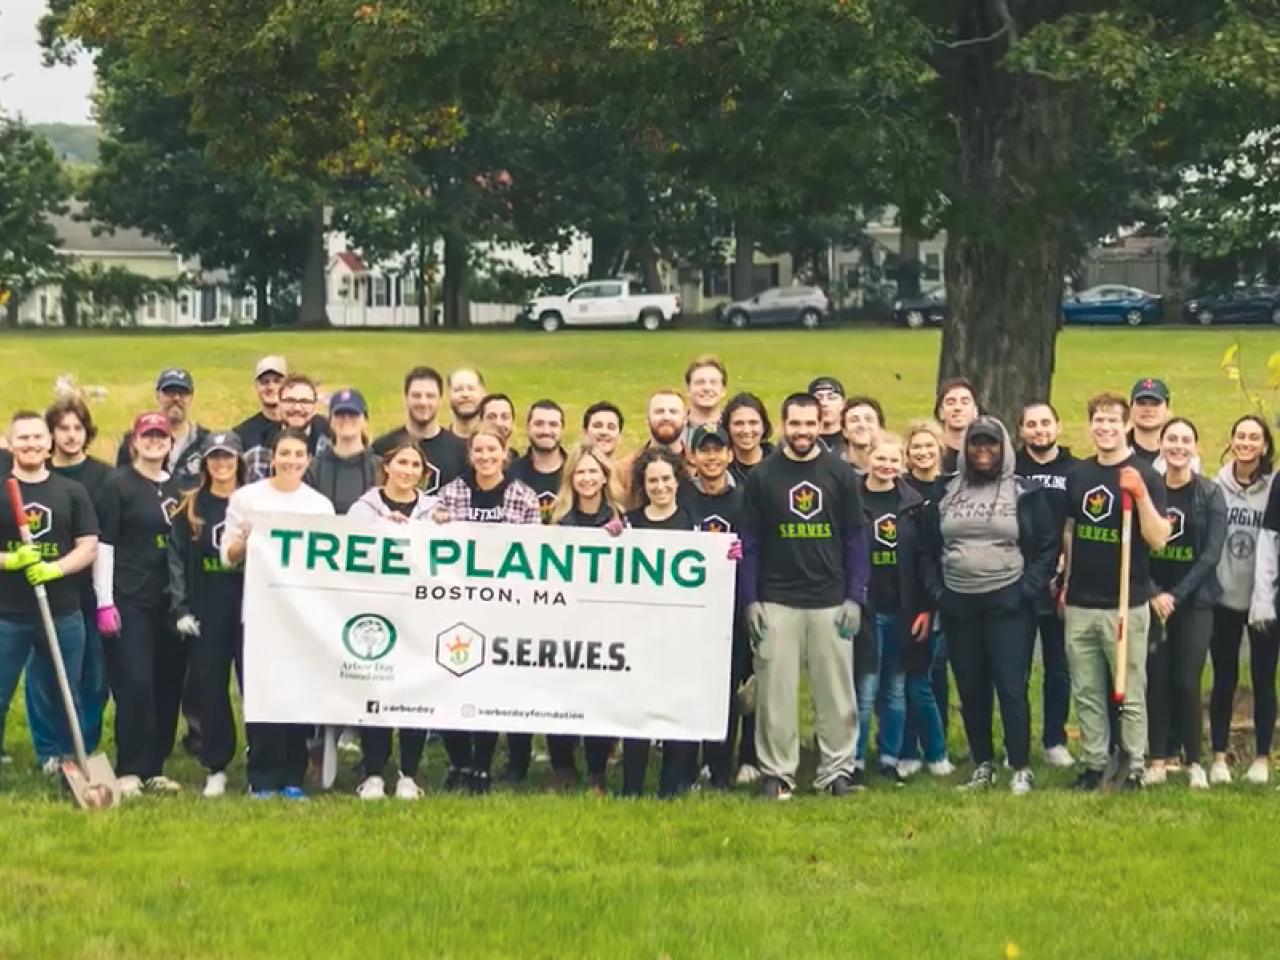 Boston DraftKings employees holding Tree Planting sign